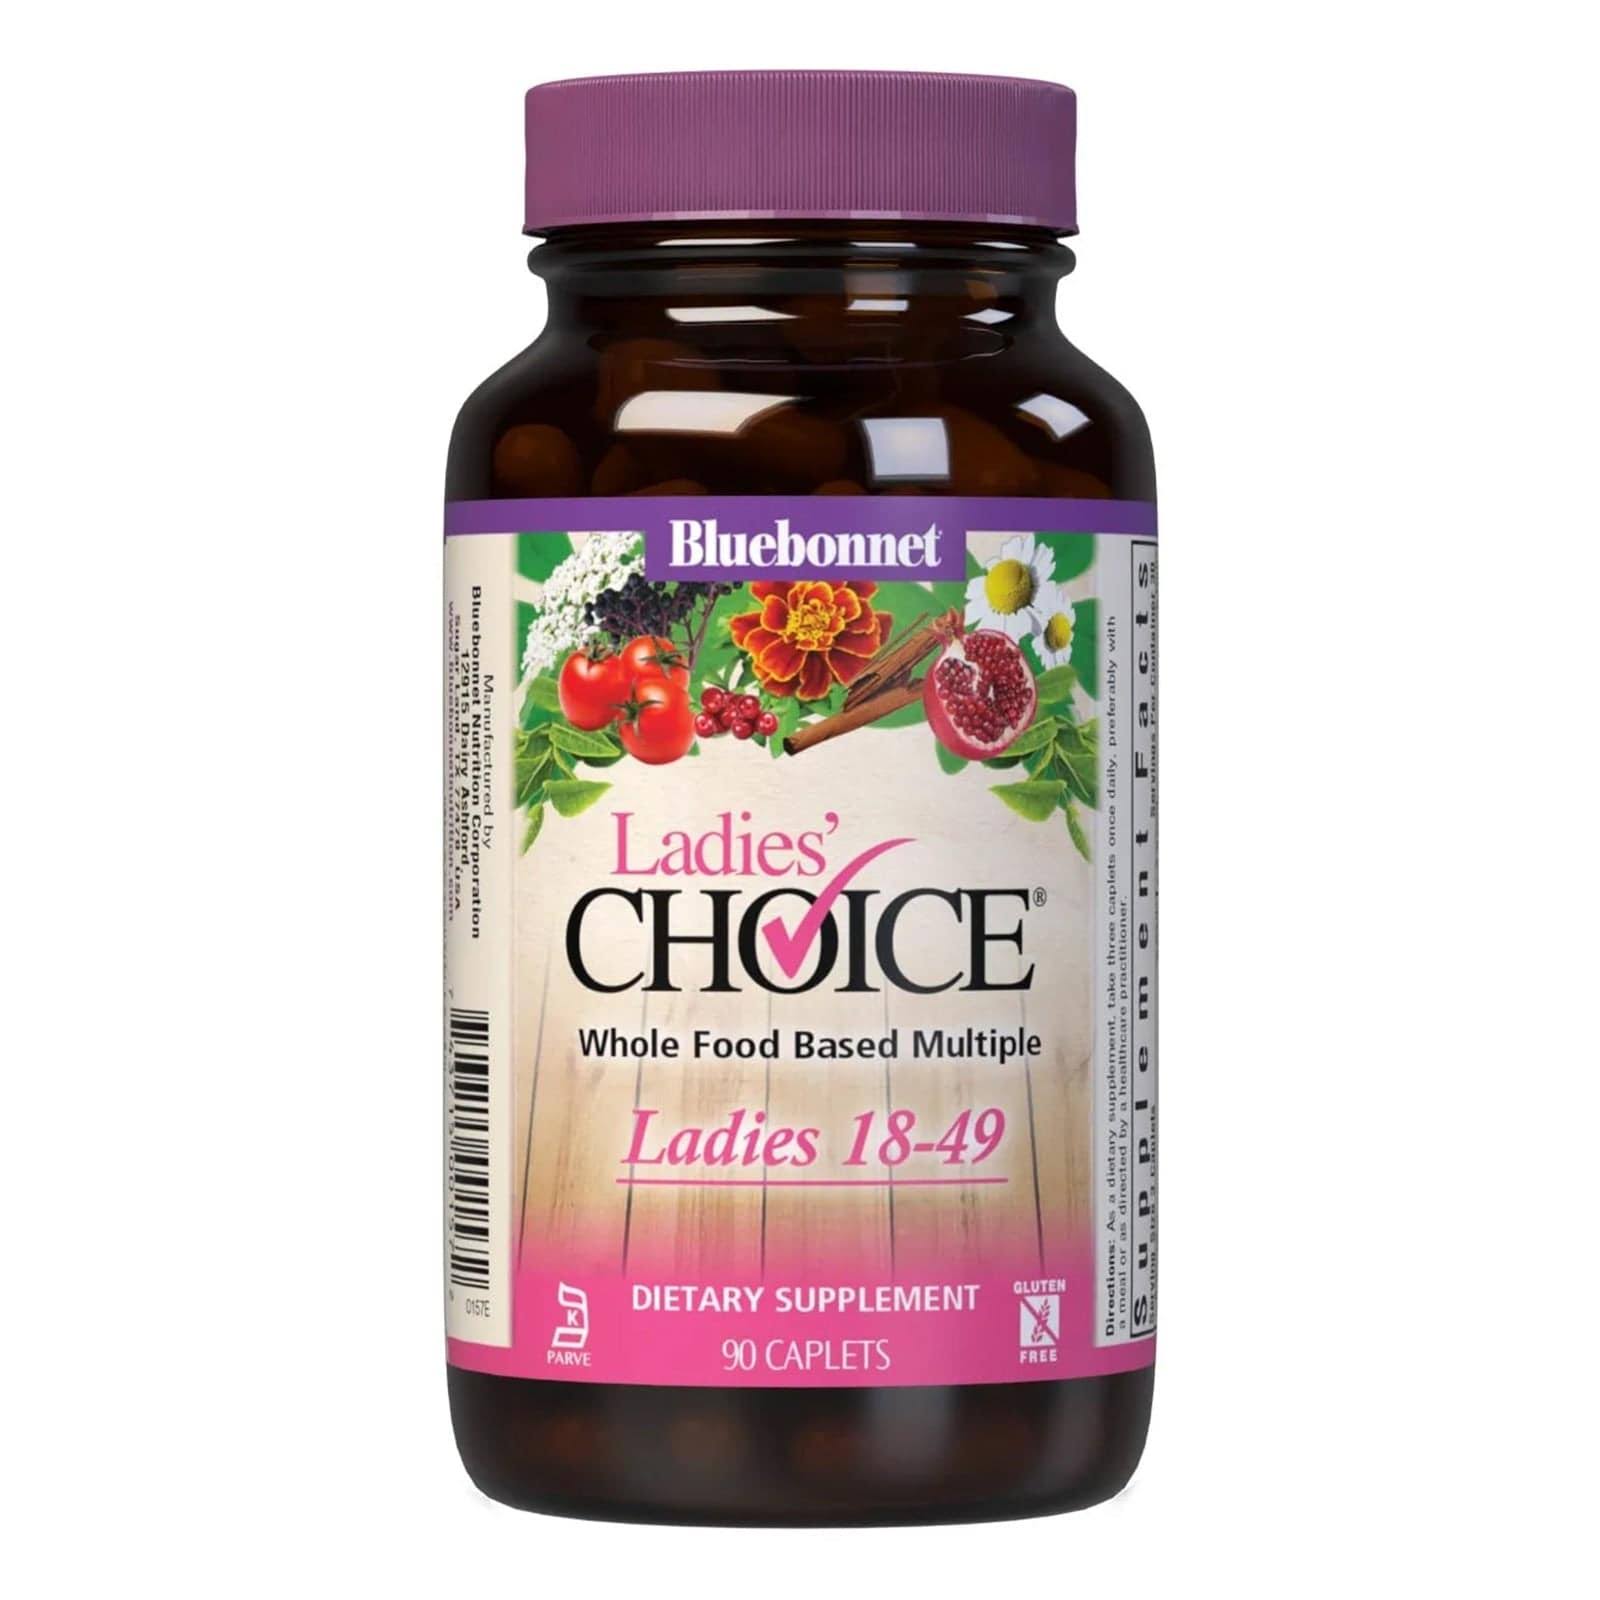 Bluebonnet Ladies' Choice Targeted Multiples Dietary Supplement - 90ct